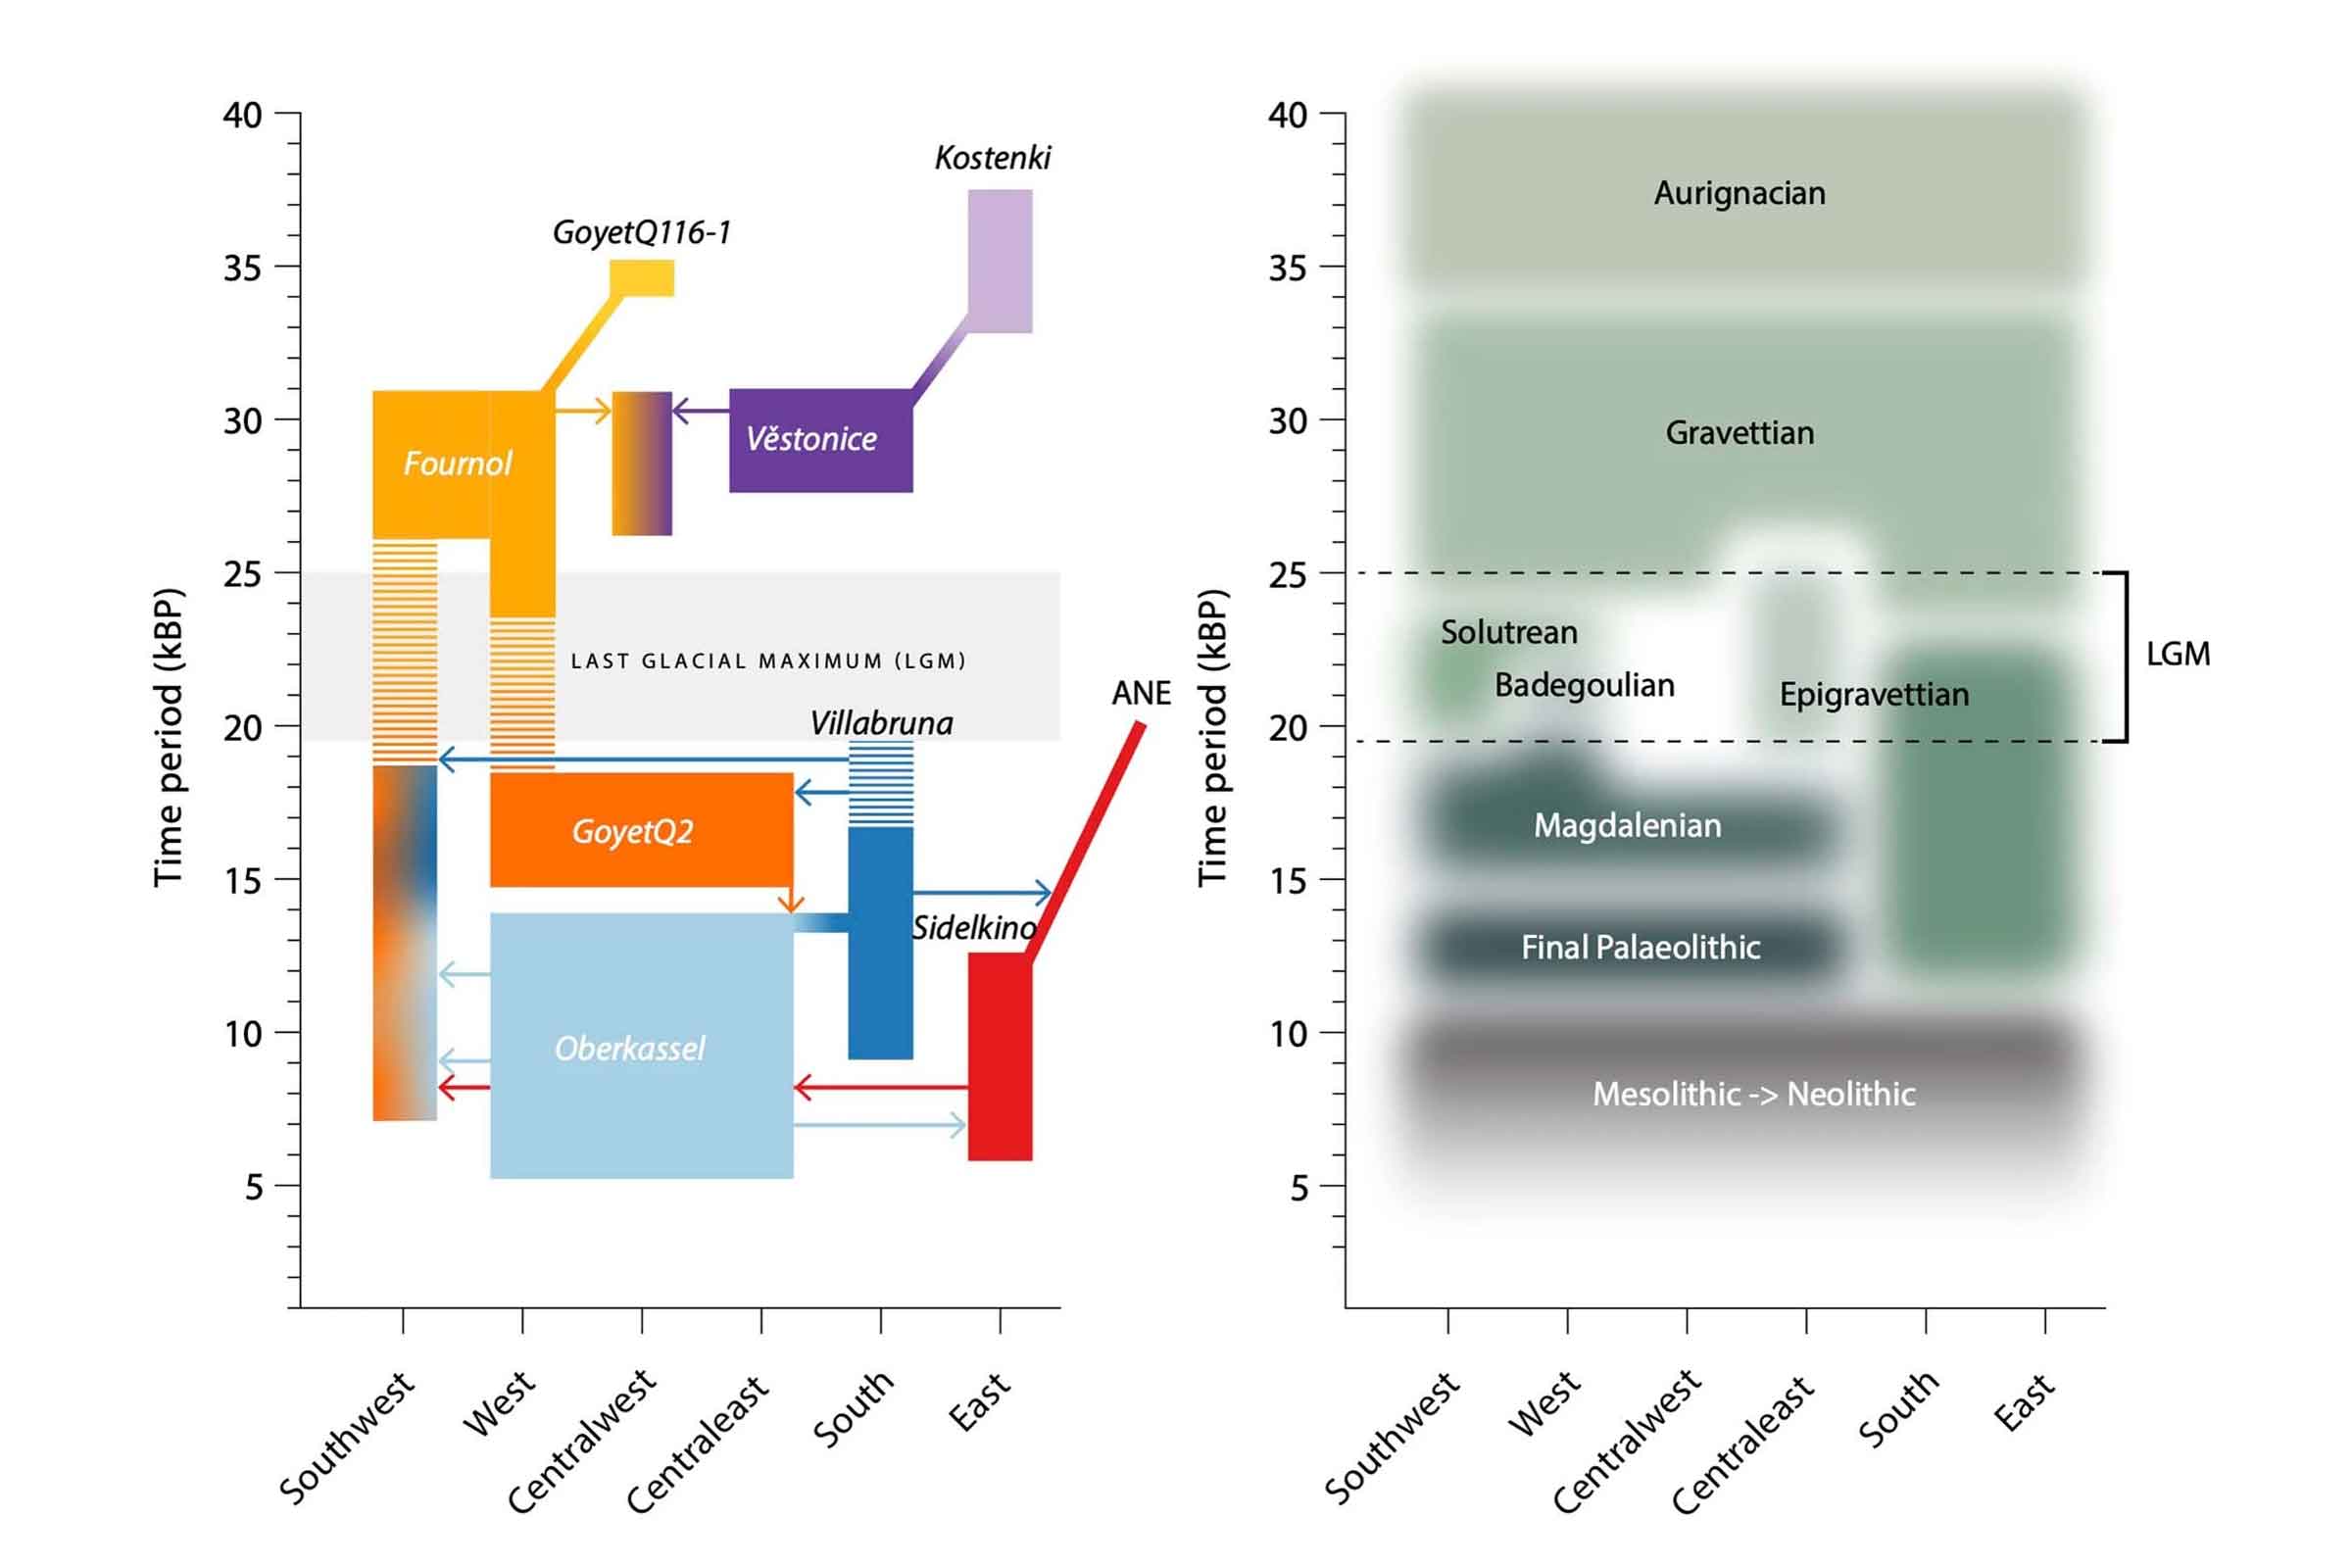 A panel at left showing genetic ancestry relationships over time, panel at right showing archaeological industries